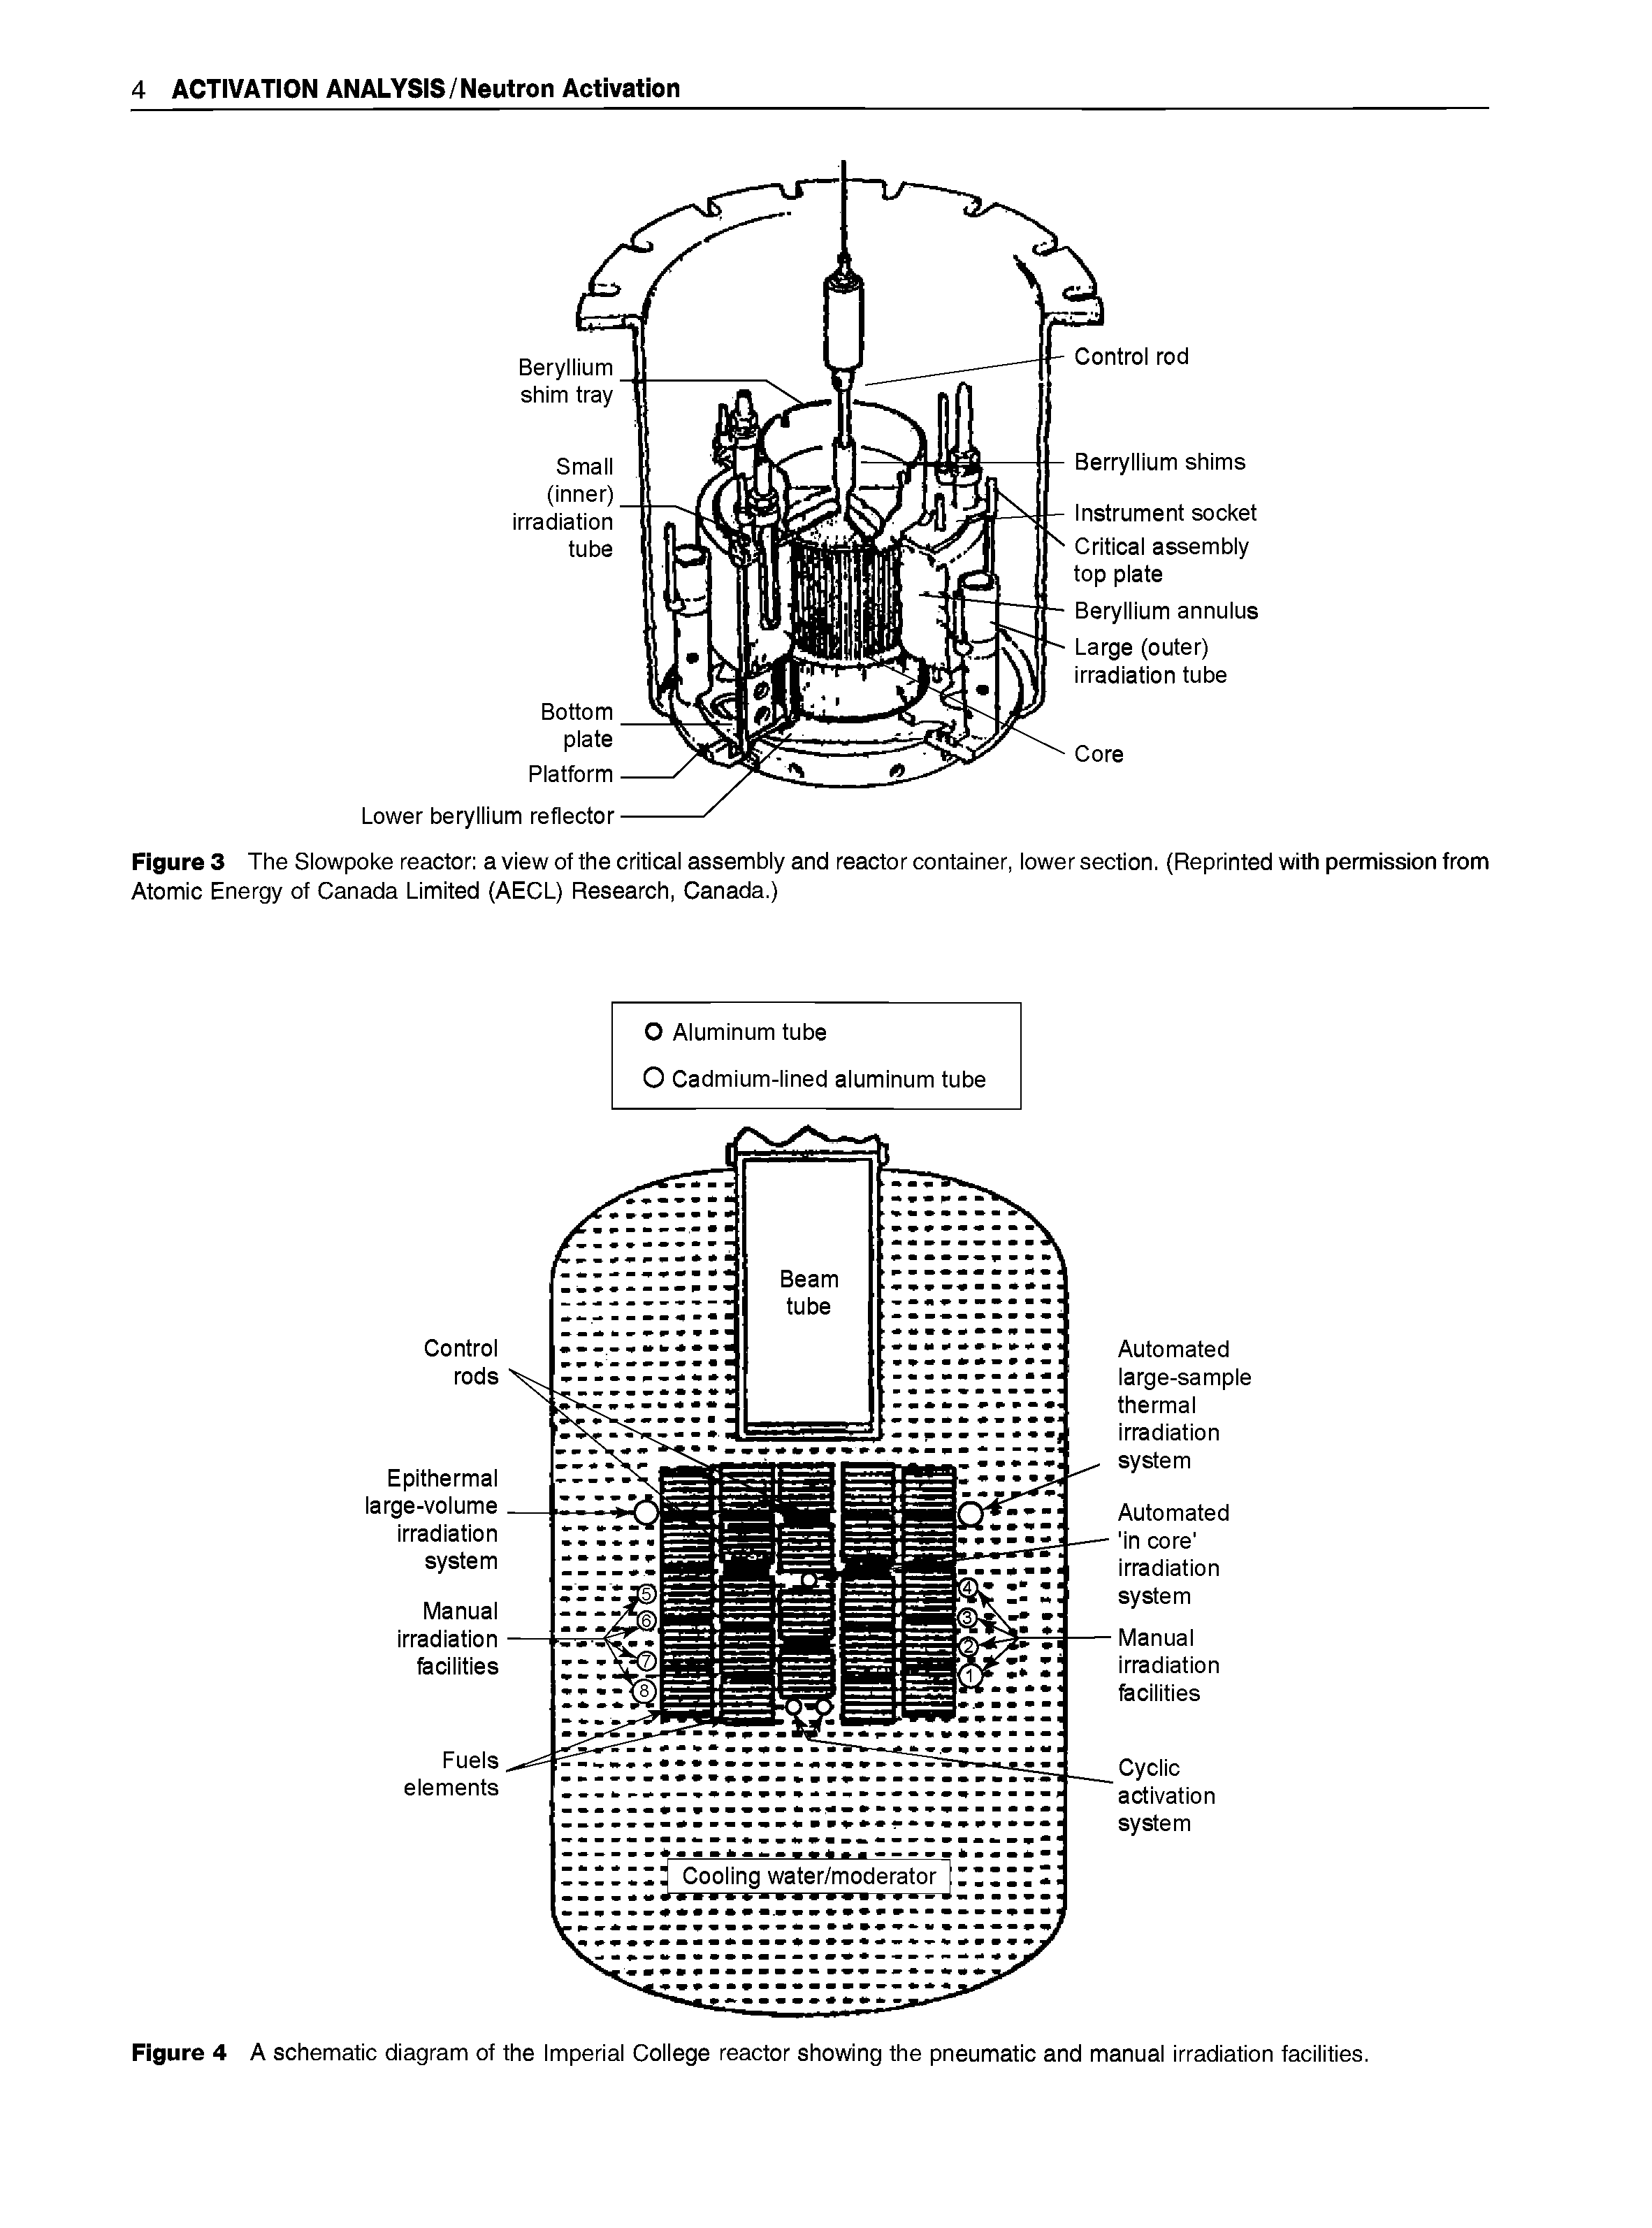 Figure 3 The Slowpoke reactor a view of the critical assembly and reactor container, lower section. (Reprinted with permission from Atomic Energy of Canada Limited (AECL) Research, Canada.)...